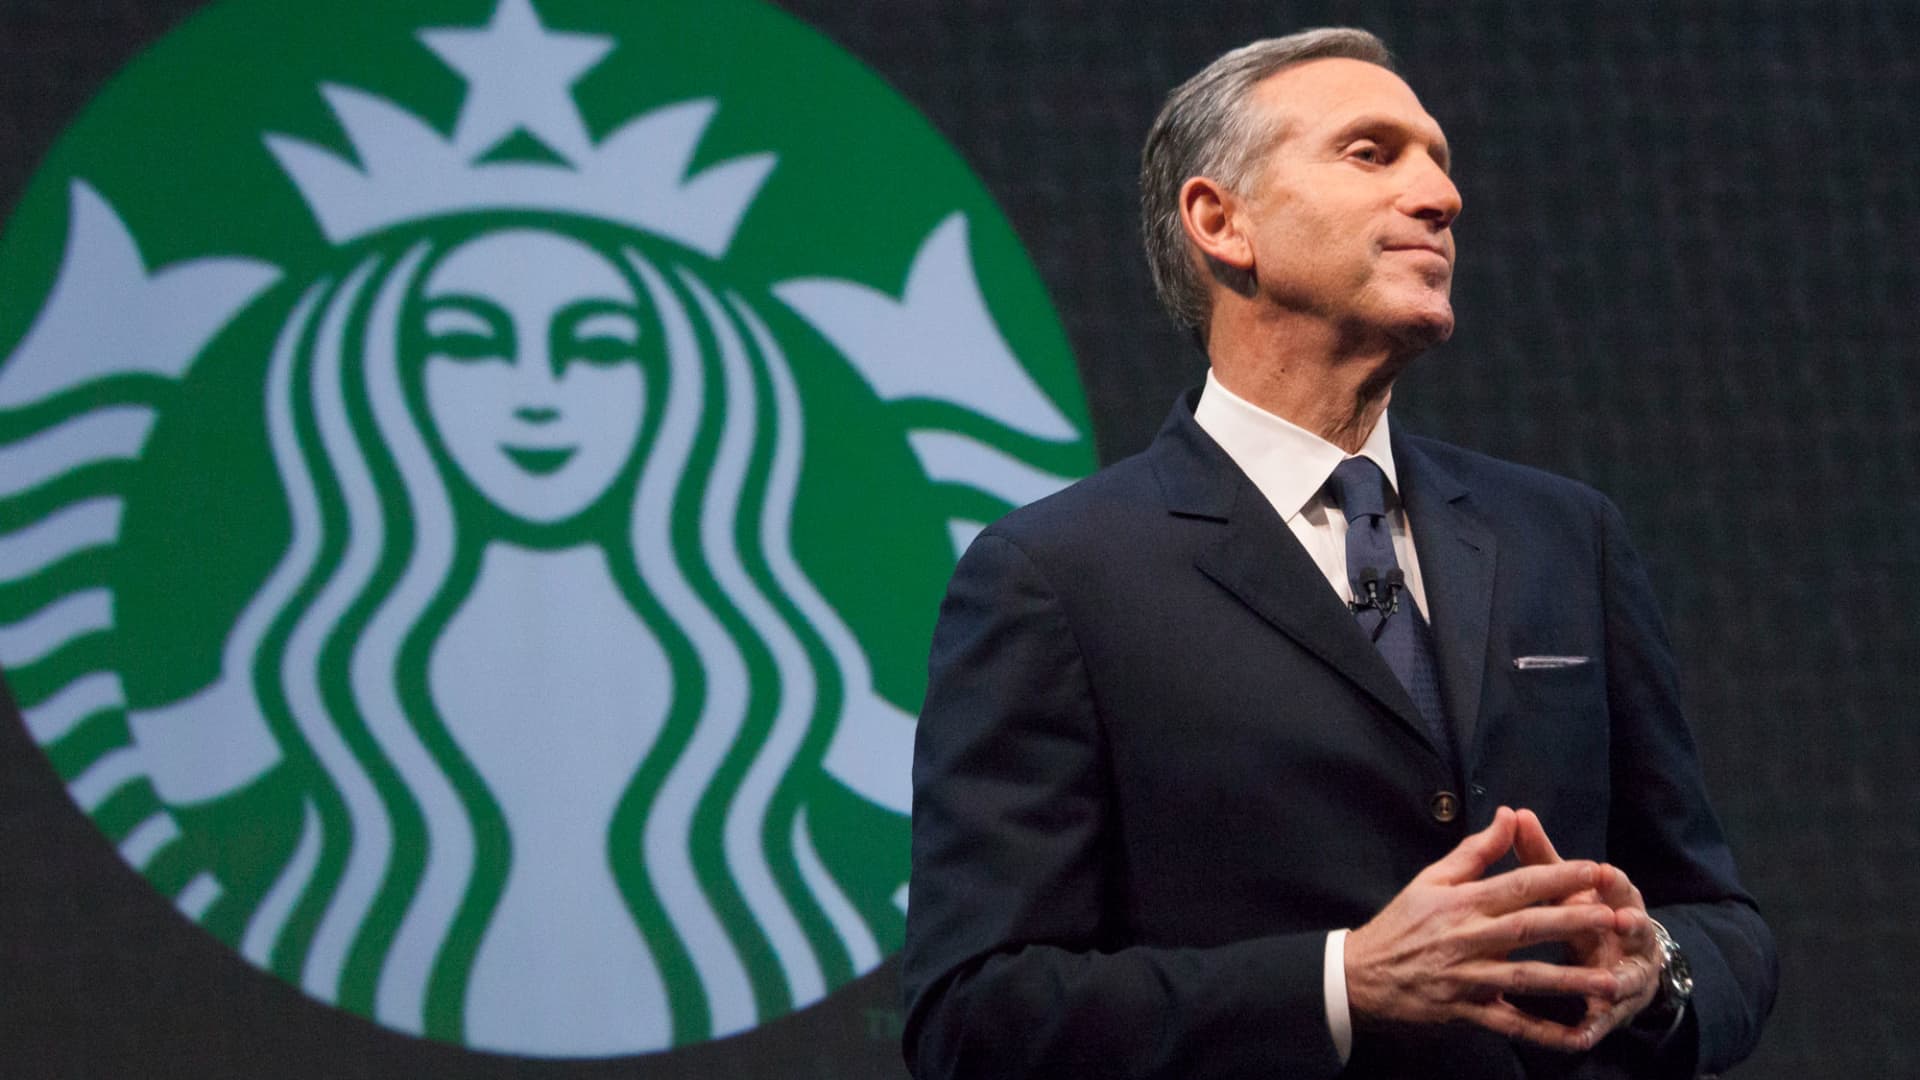 starbucks-ceo-howard-schultz-tells-corporate-workers-to-return-to-the-office-3-days-a-week